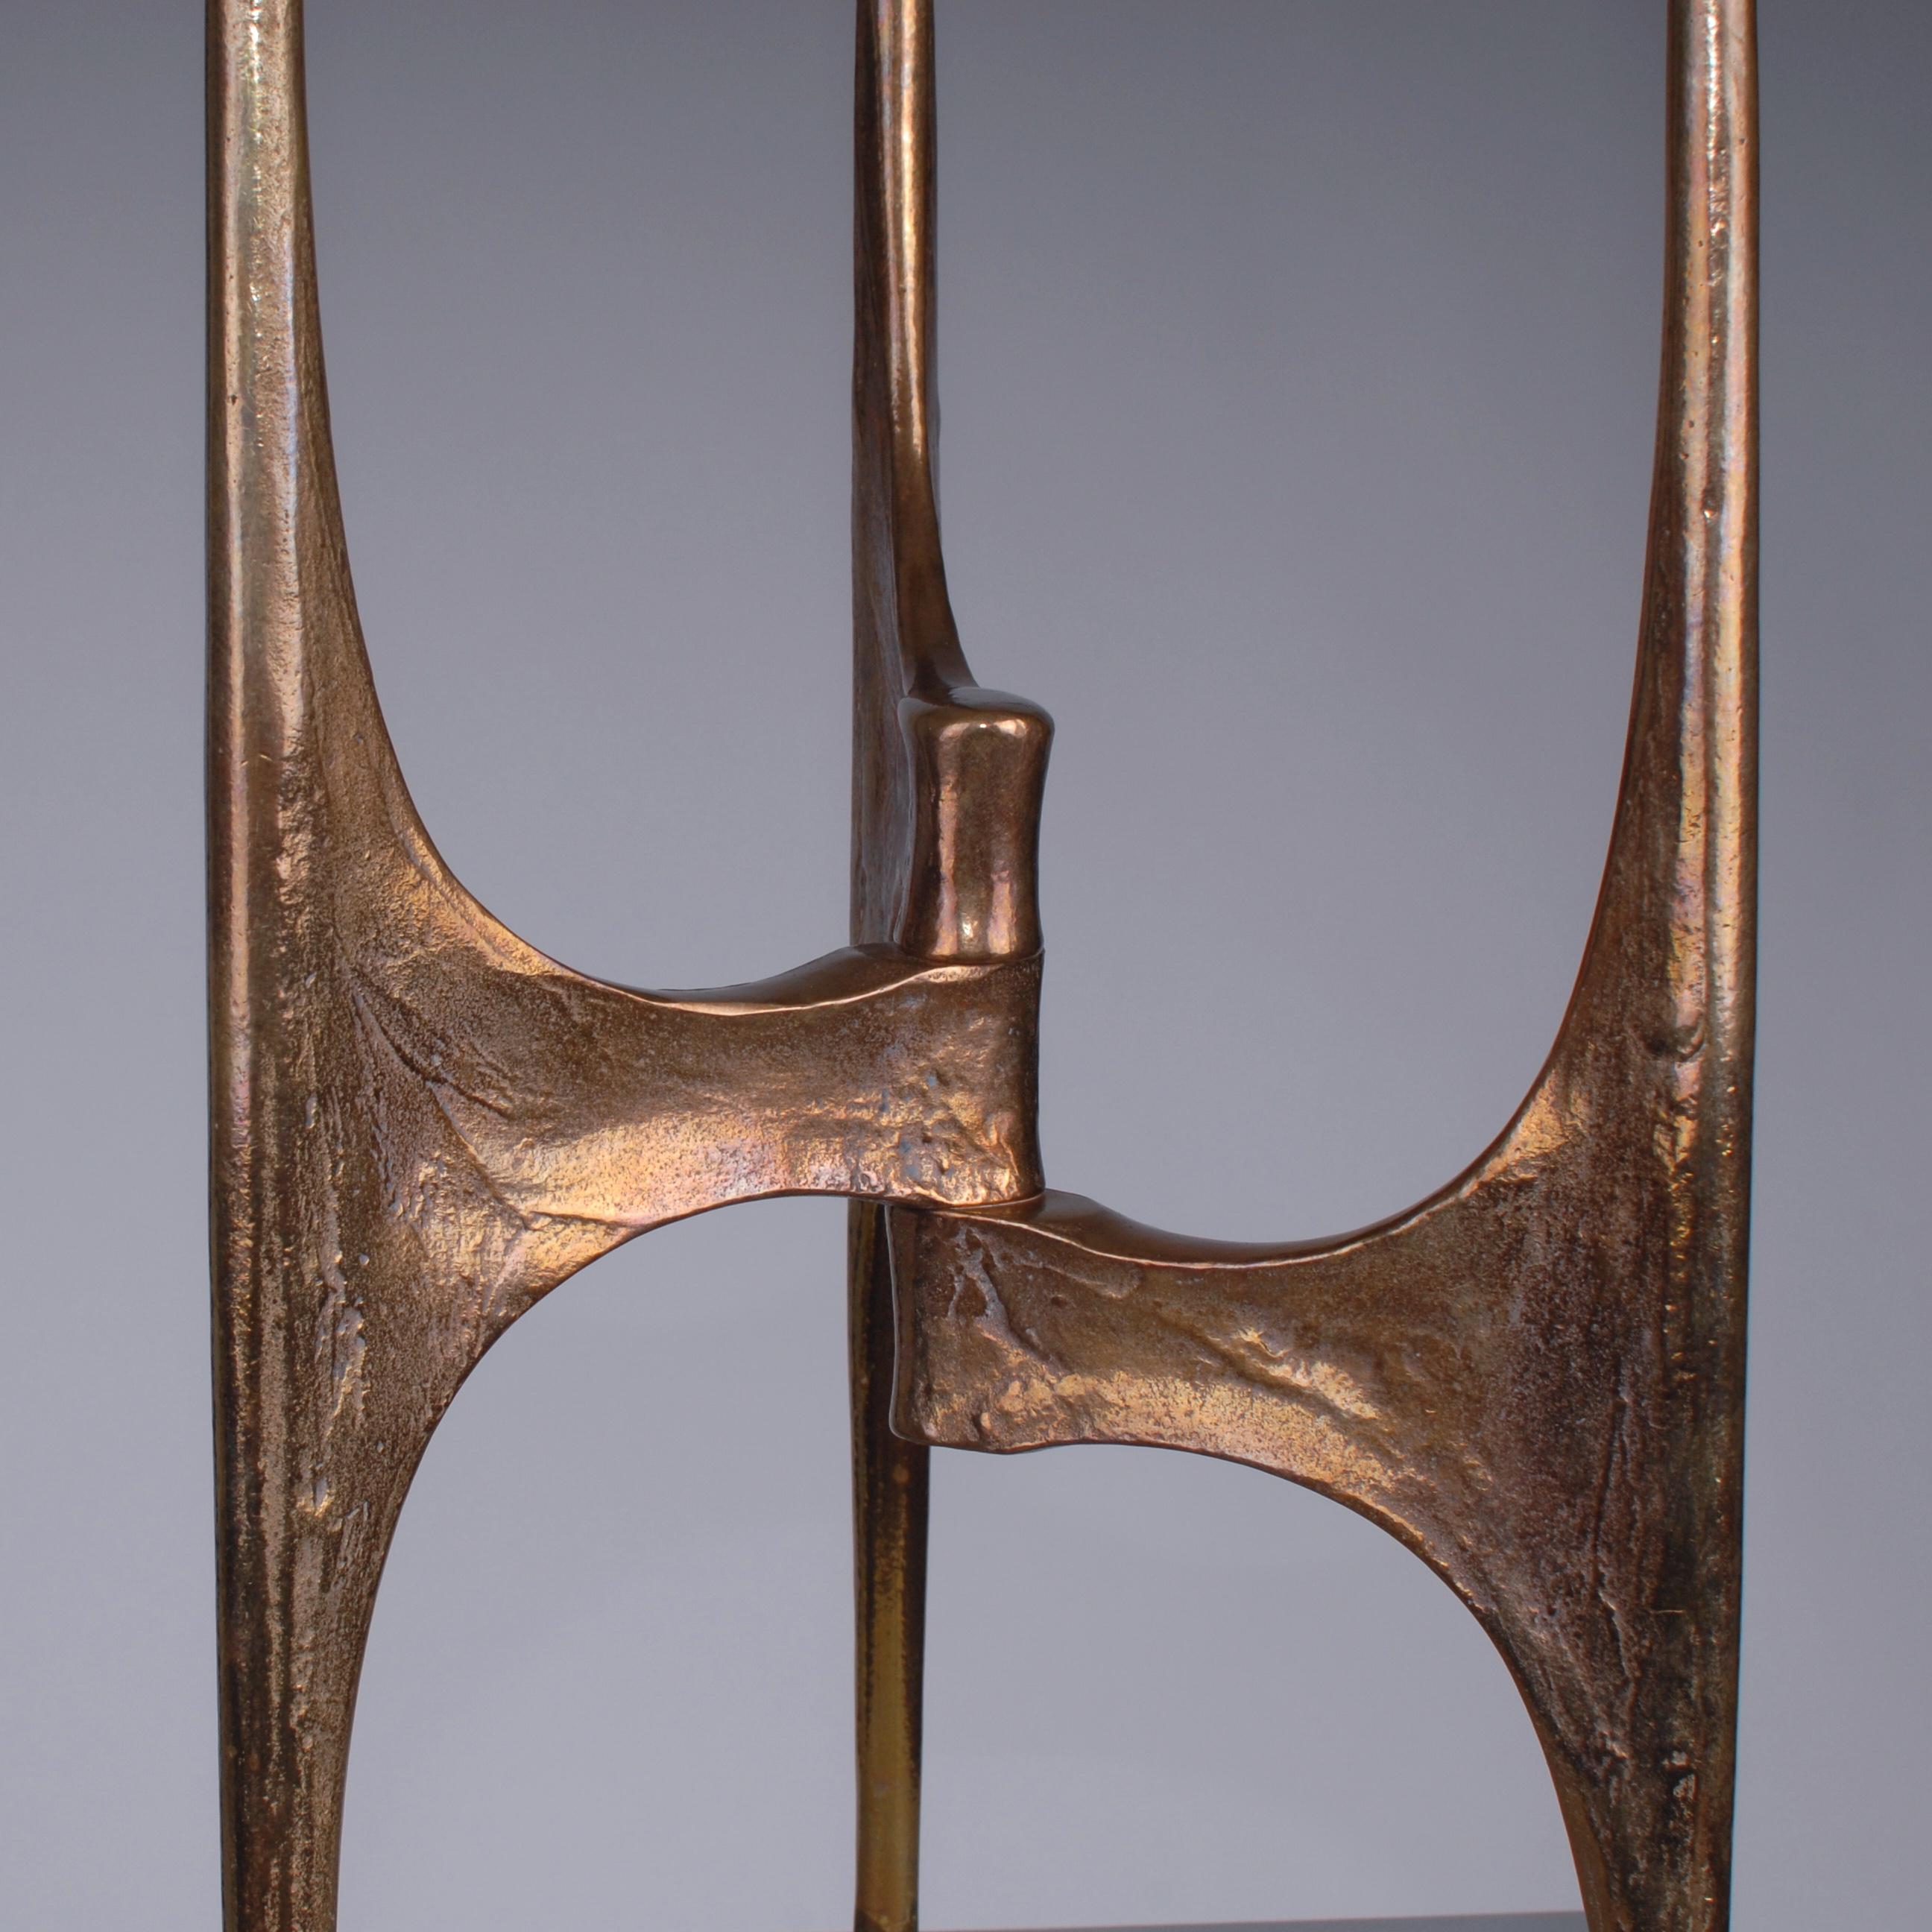 Molded Monumental Mid-Century Modern Bronze Candelabra by Harjes, Germany, Late 1970